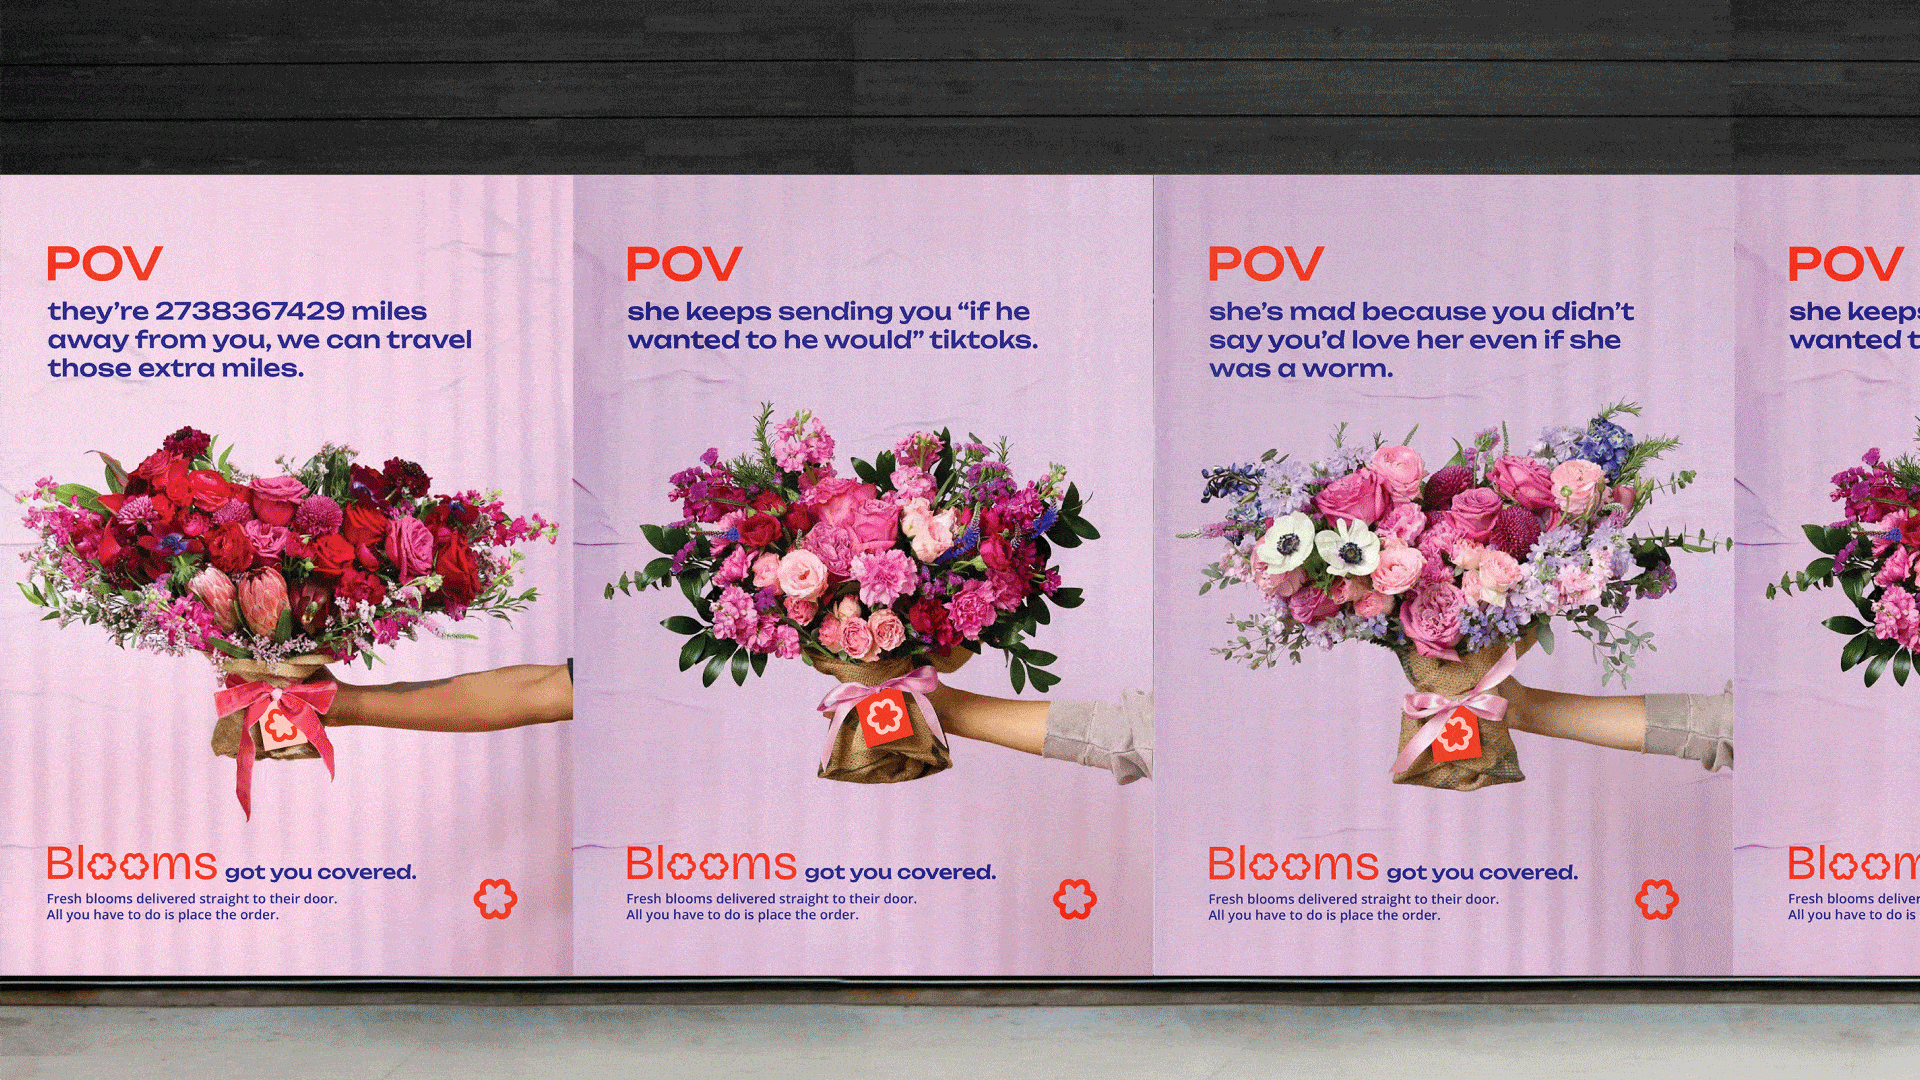 Brand assets for blooms that includes copywriting, advertising, and packaging